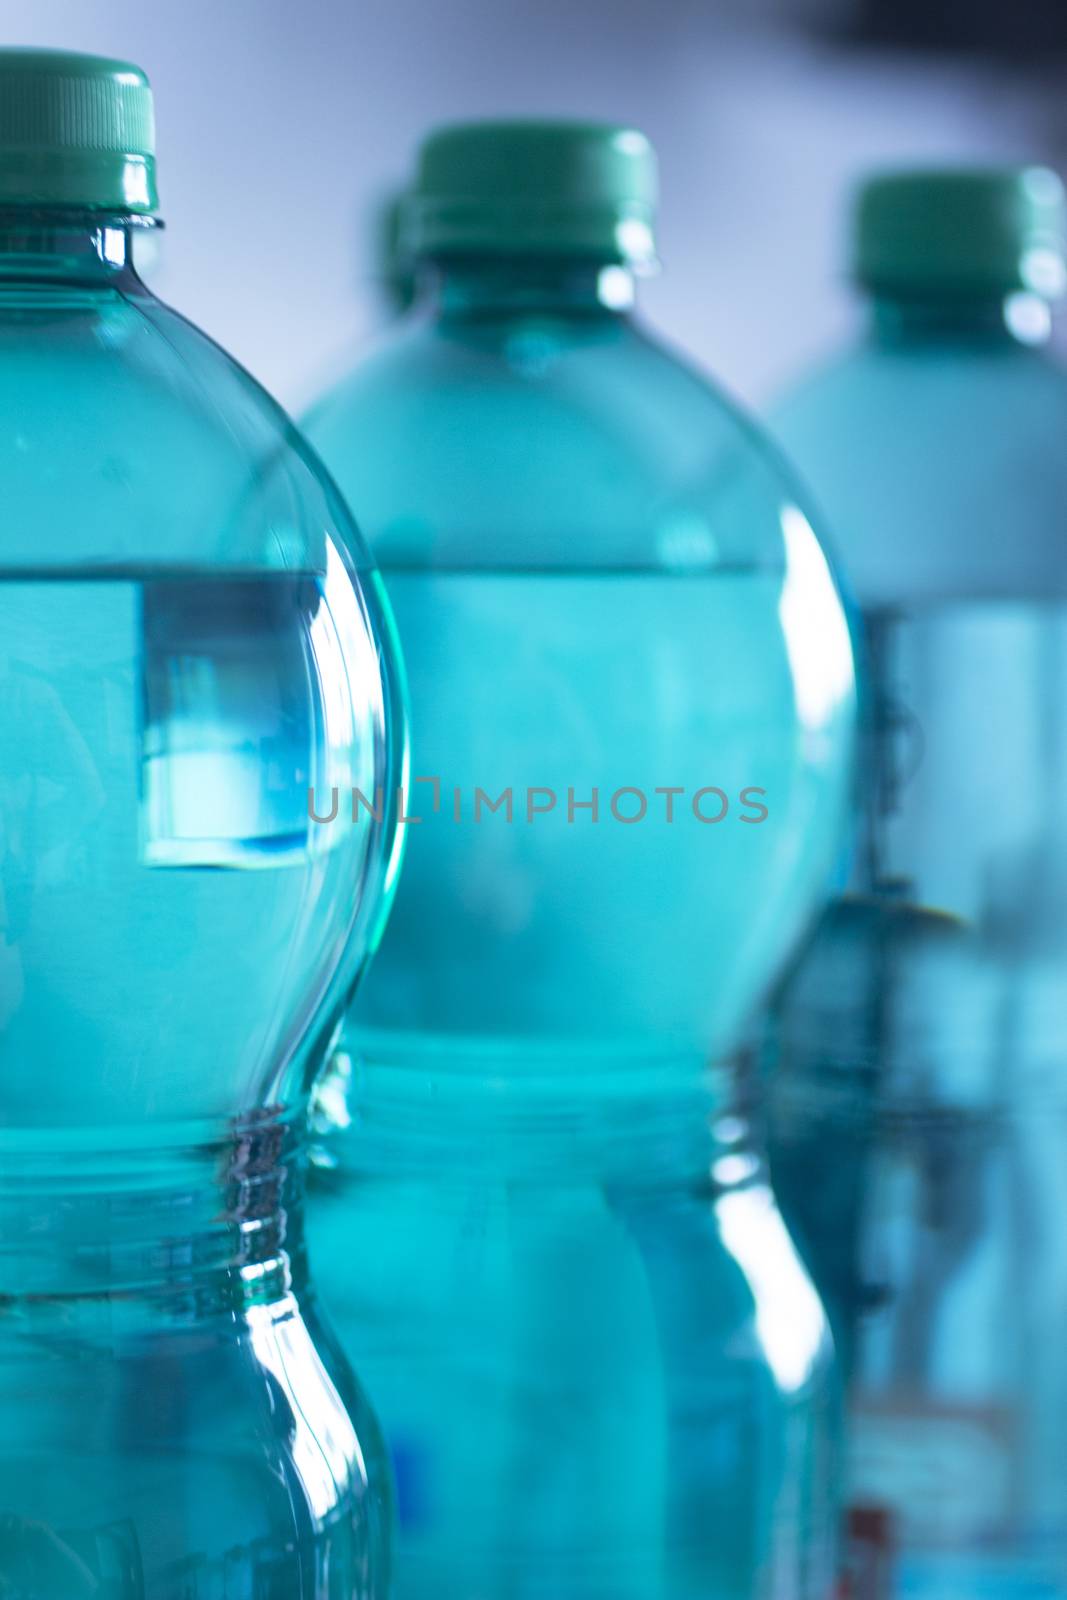 Group of four isolated green plastic water bottles on a plain blue studio background close-up photo.